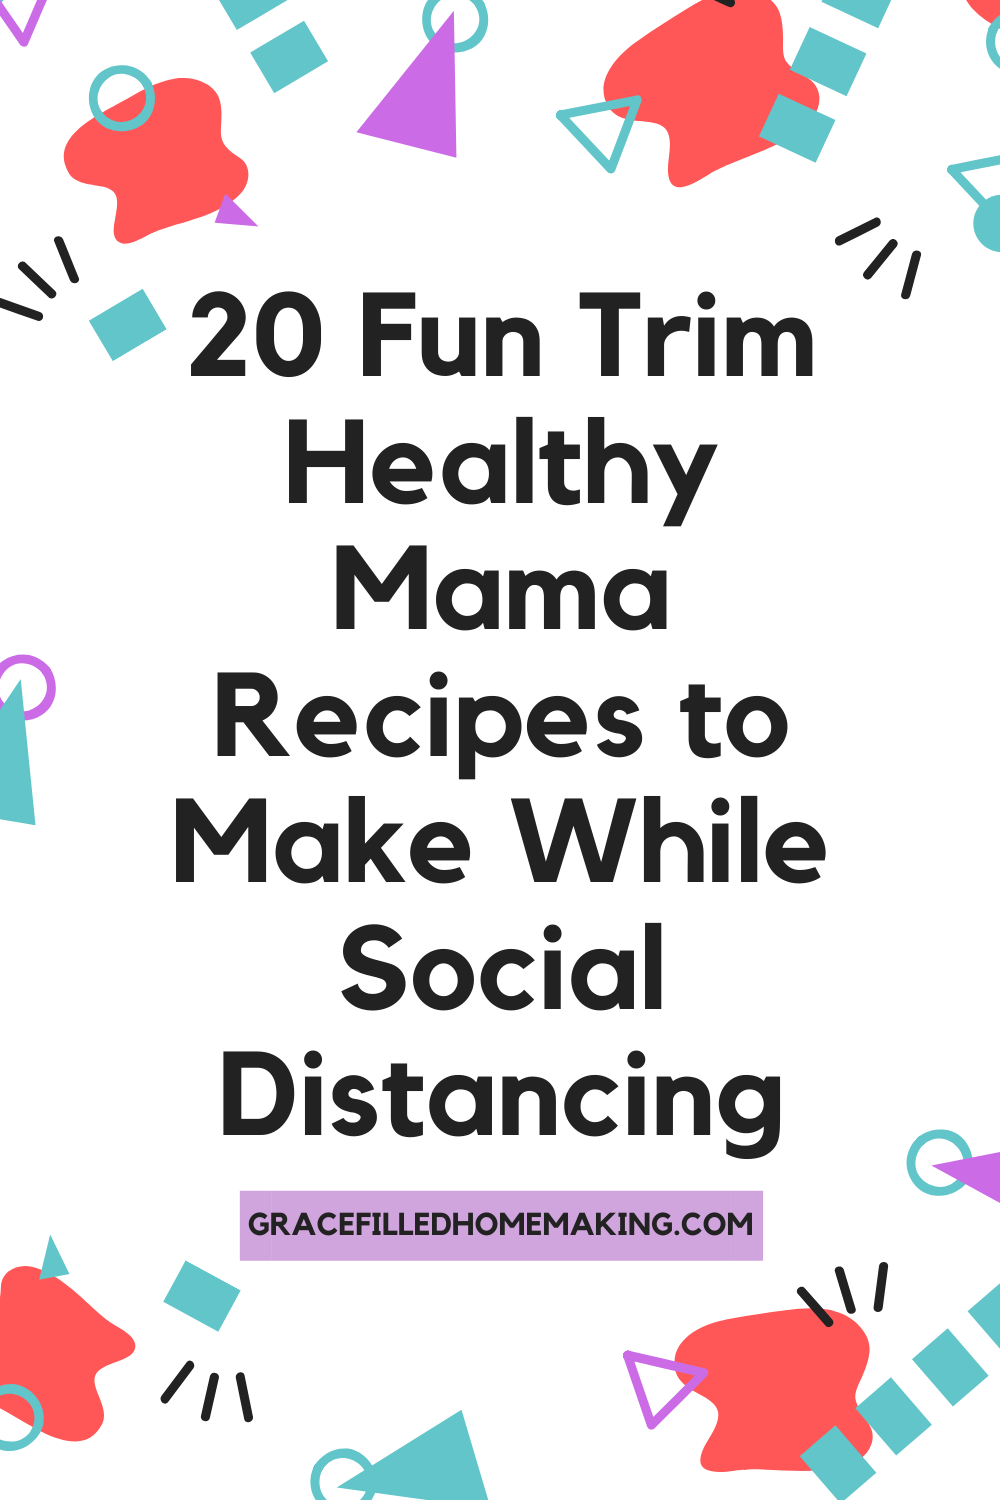 Here's a list of 20 Fun Trim Healthy Mama recipes to make while you're social distancing. Breakfast, lunch, and snack ideas can be found here!